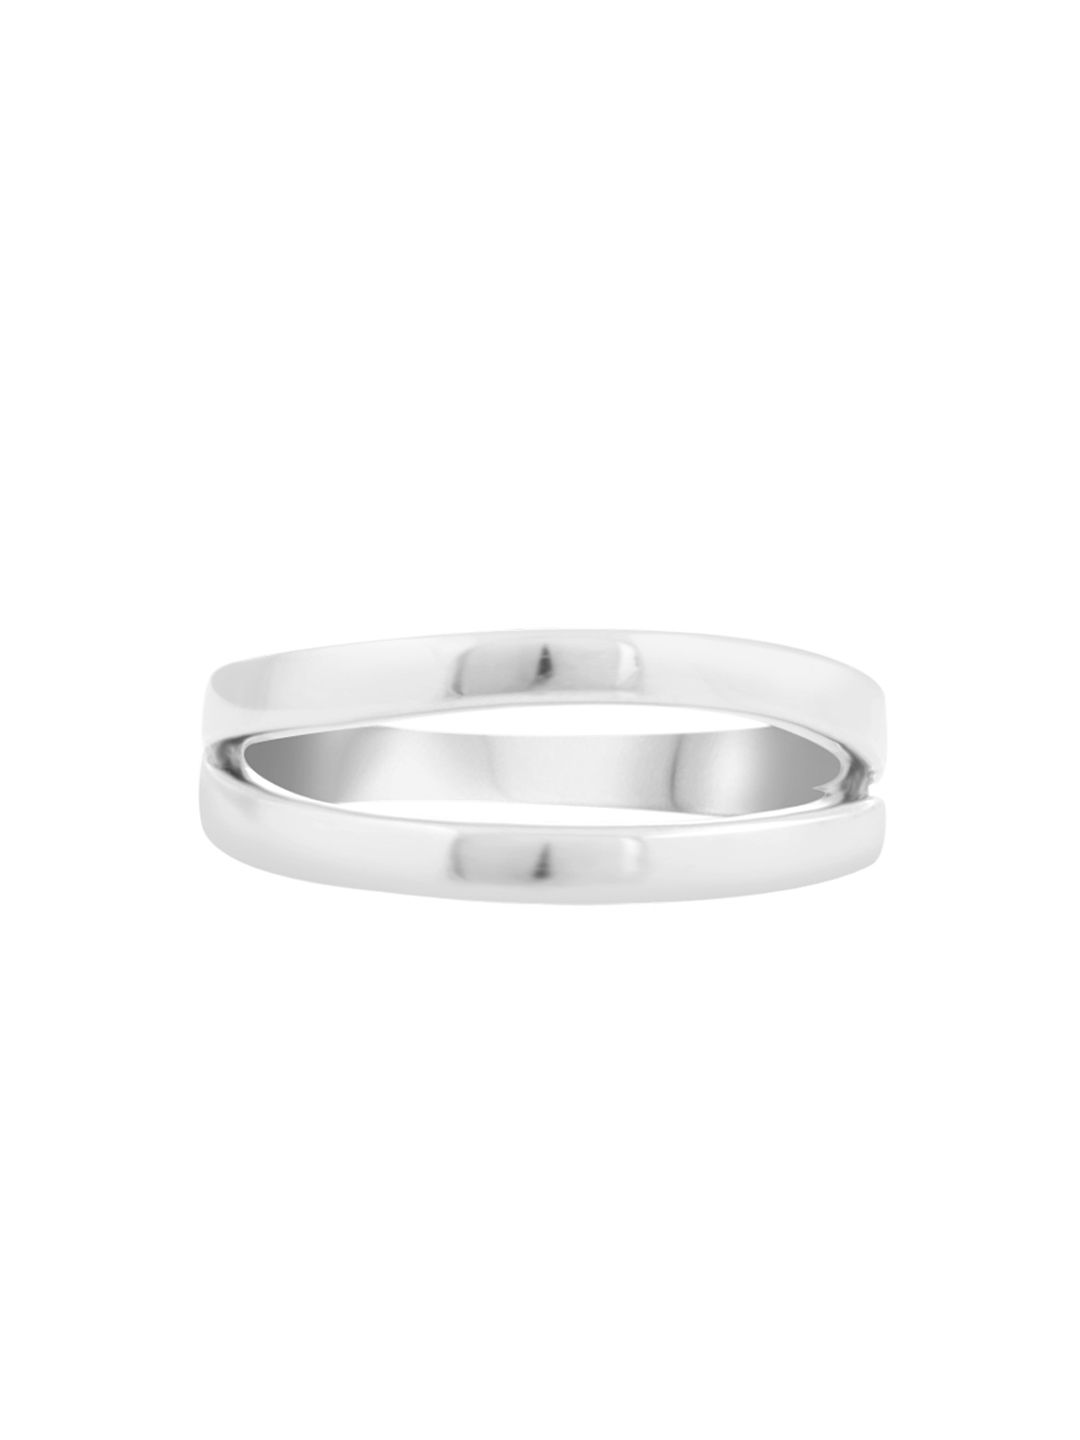 TALISMAN Women Rhodium-Plated Silver-Toned Handcrafted Ring Price in India